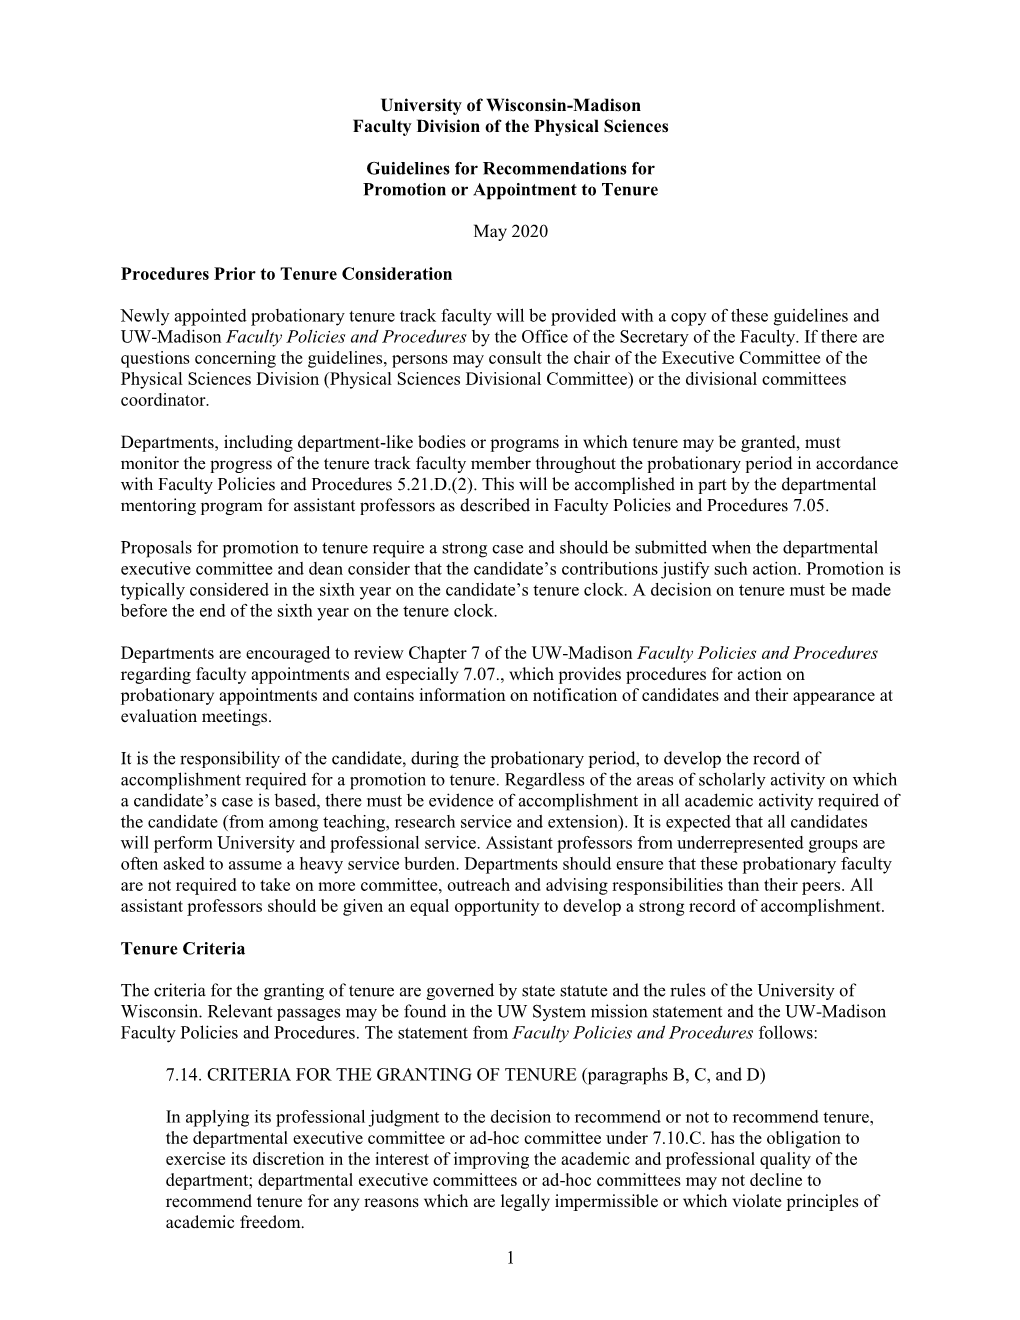 1 University of Wisconsin-Madison Faculty Division of the Physical Sciences Guidelines for Recommendations for Promotion Or Appo